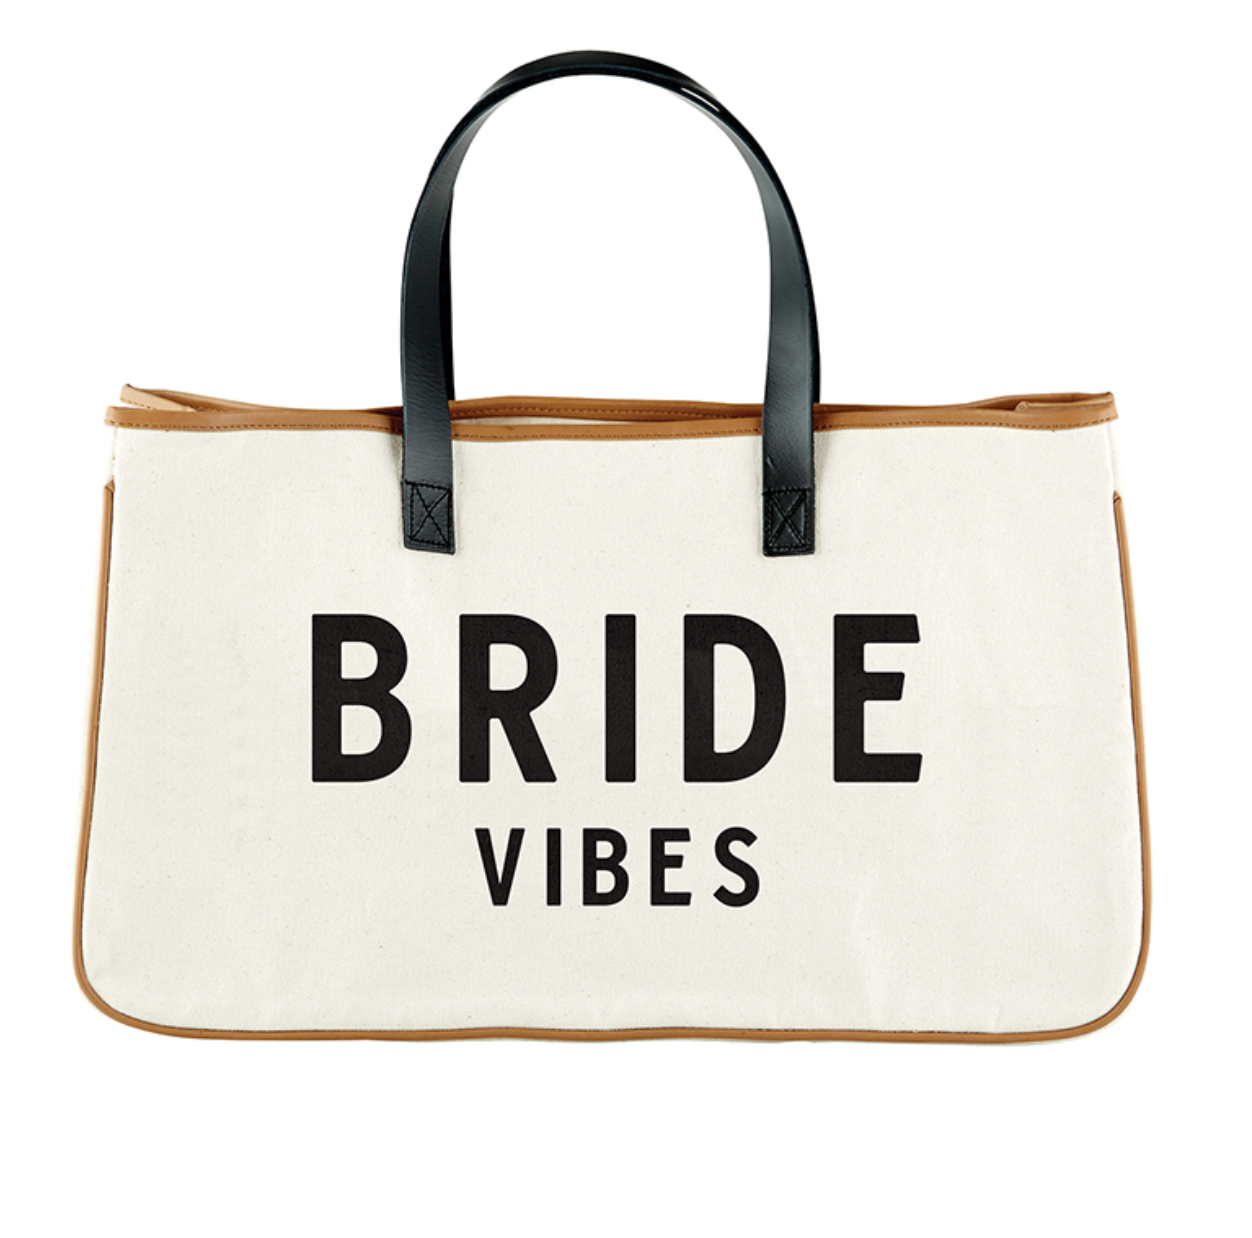 BRIDE VIBES Canvas Tote with Leather Handles